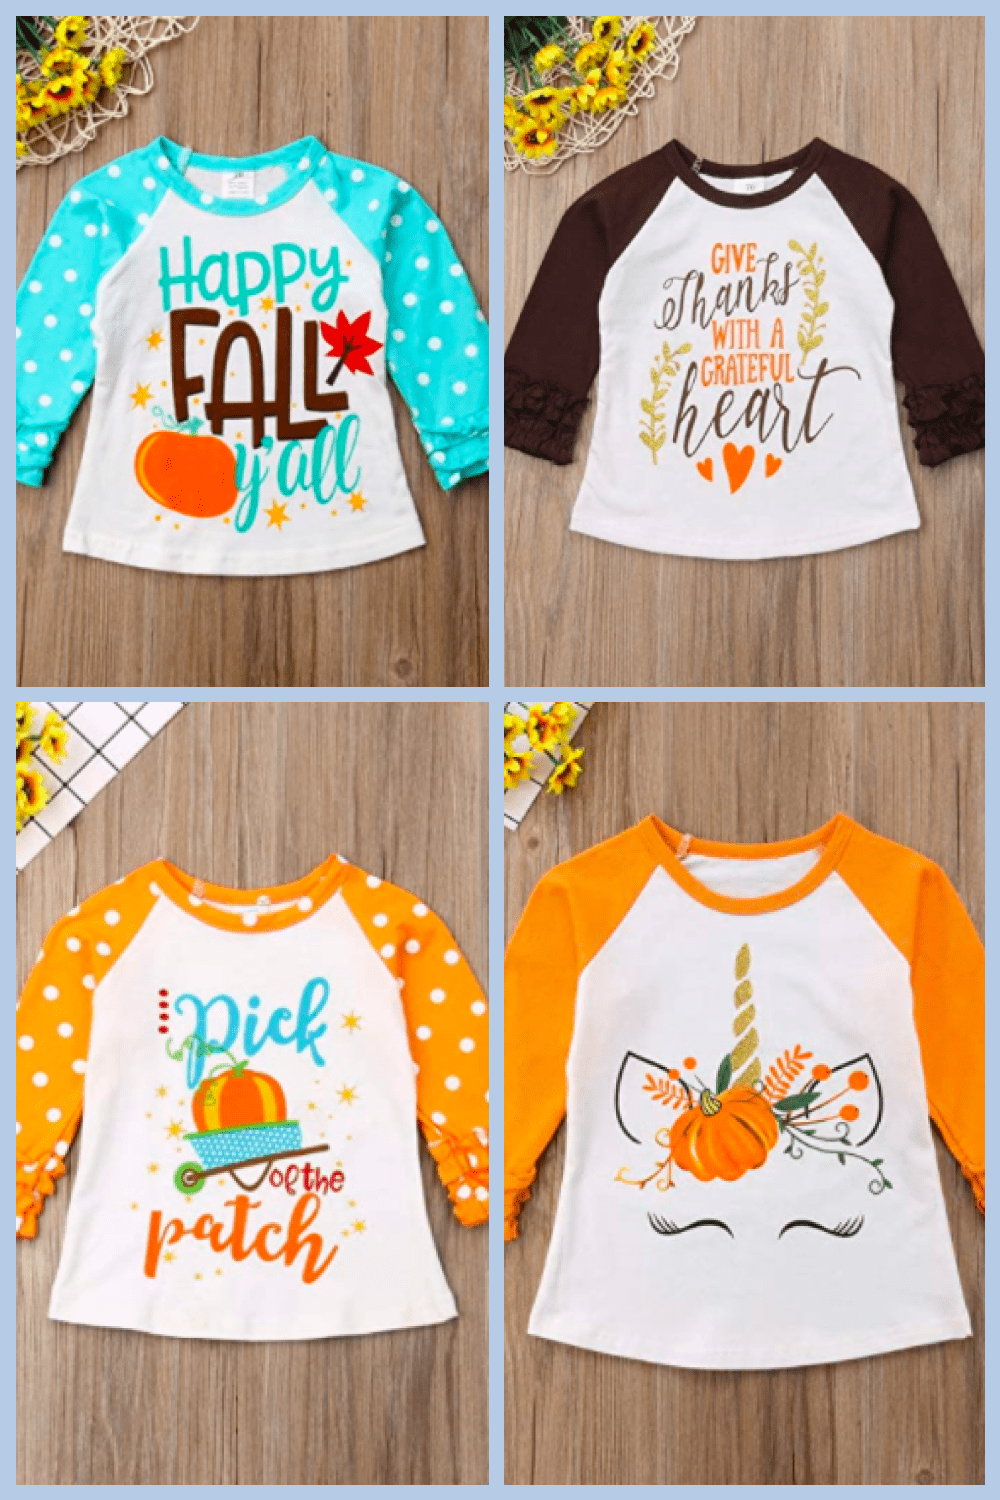 Perfect kids t-shirt in different colors.